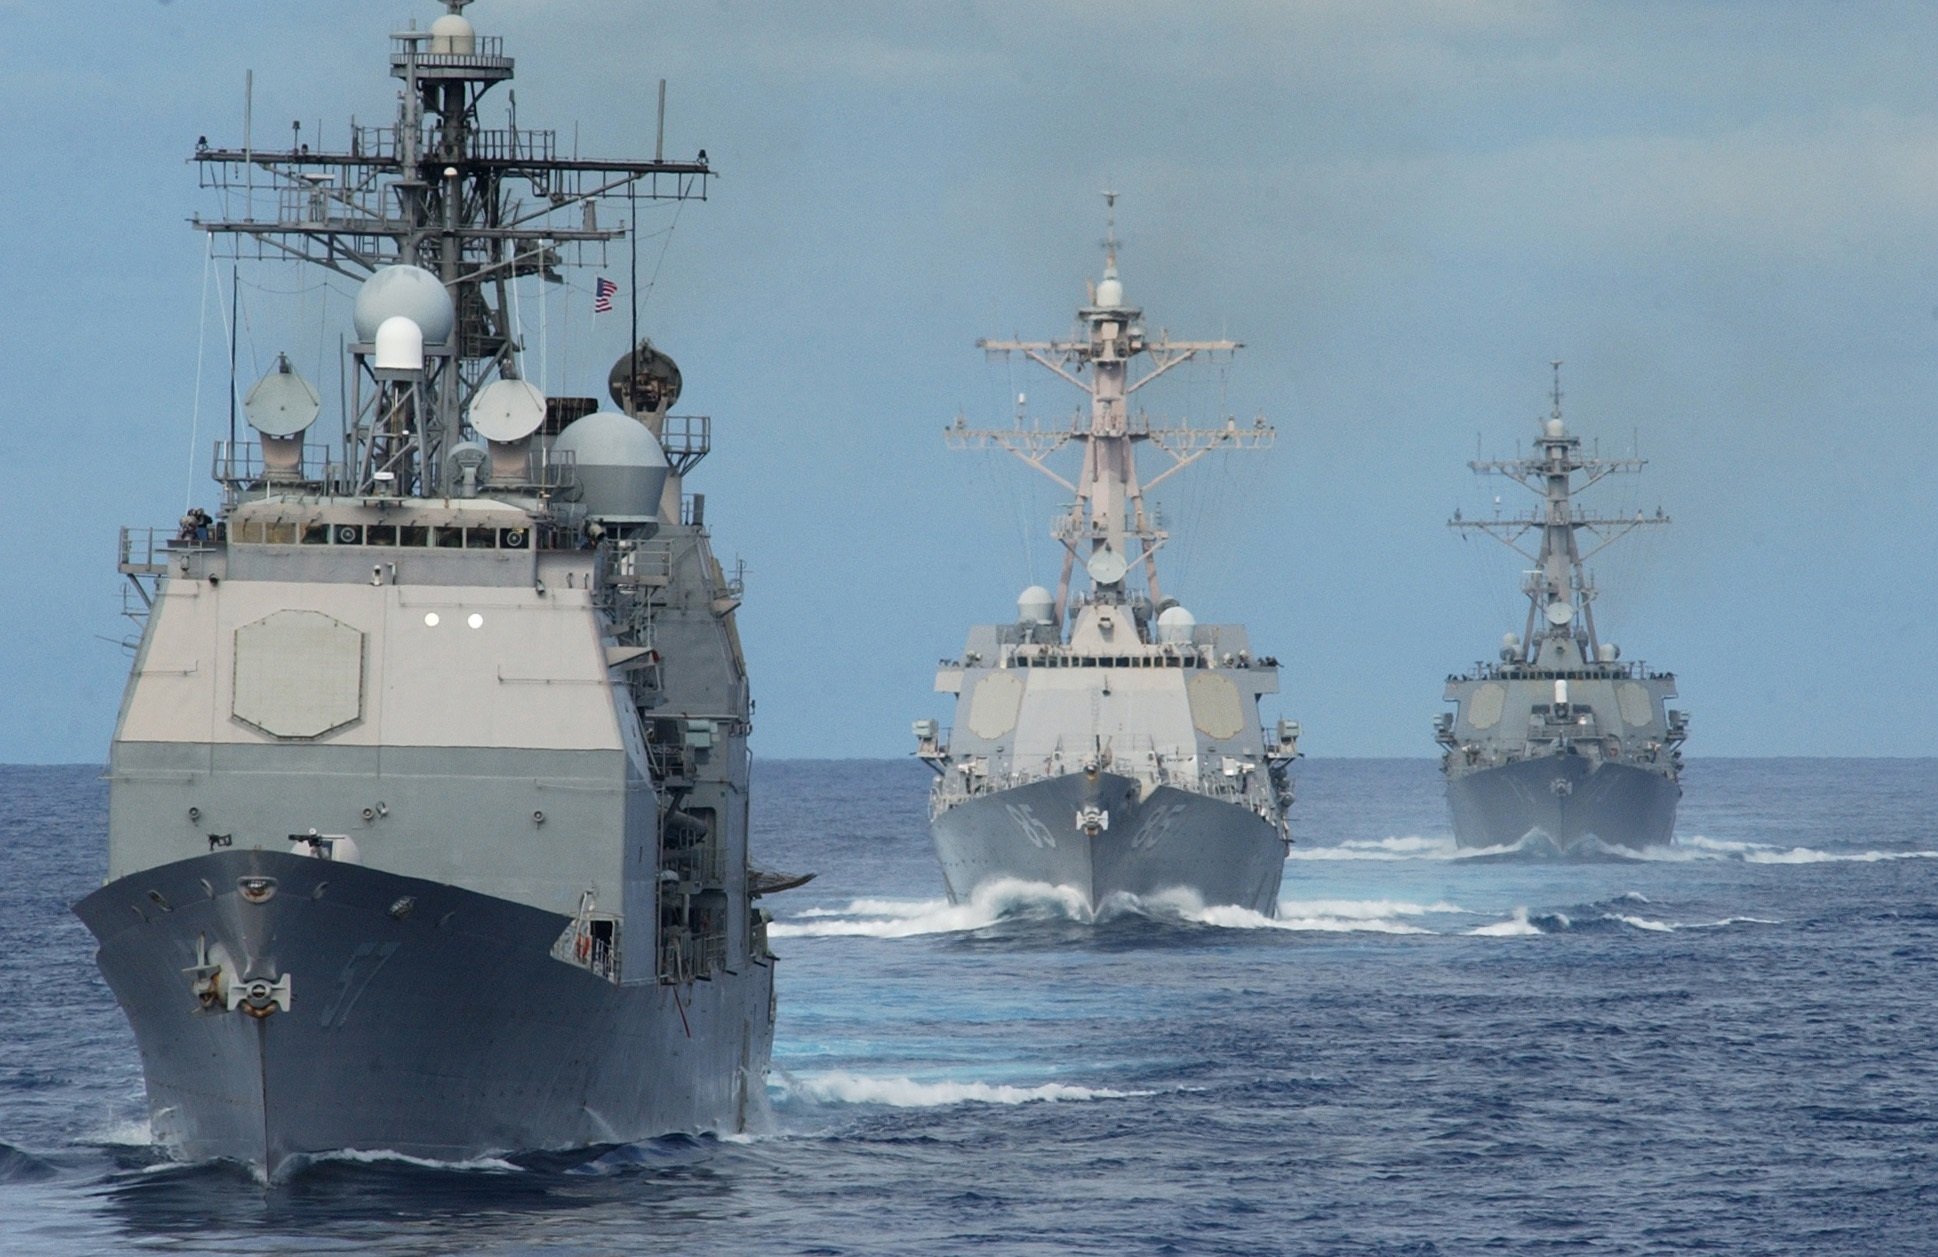 Lyle Goldstein, Naval War College, The U.S. Navy and the PLAN in the South China Sea